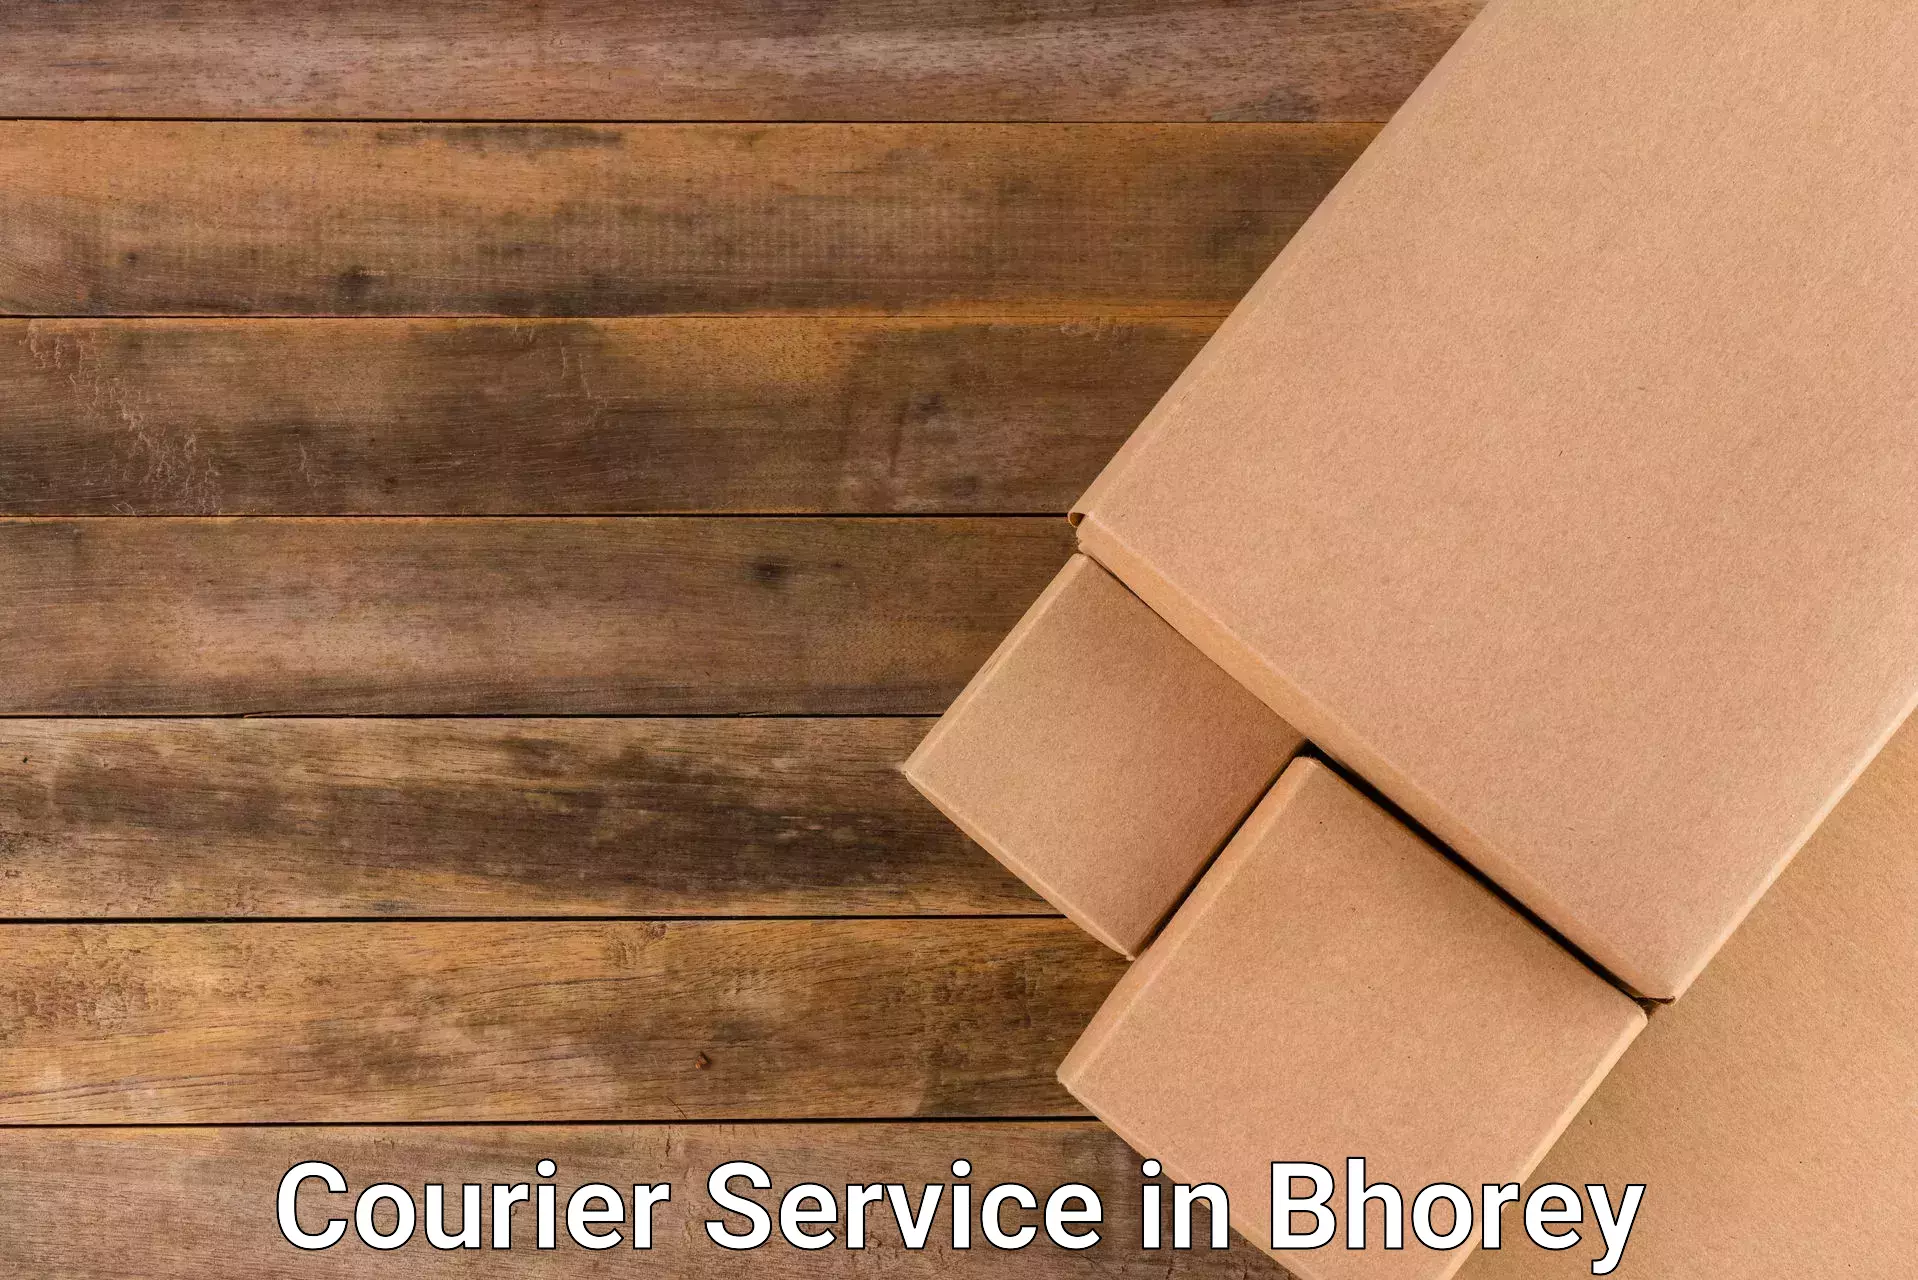 Quality courier services in Bhorey